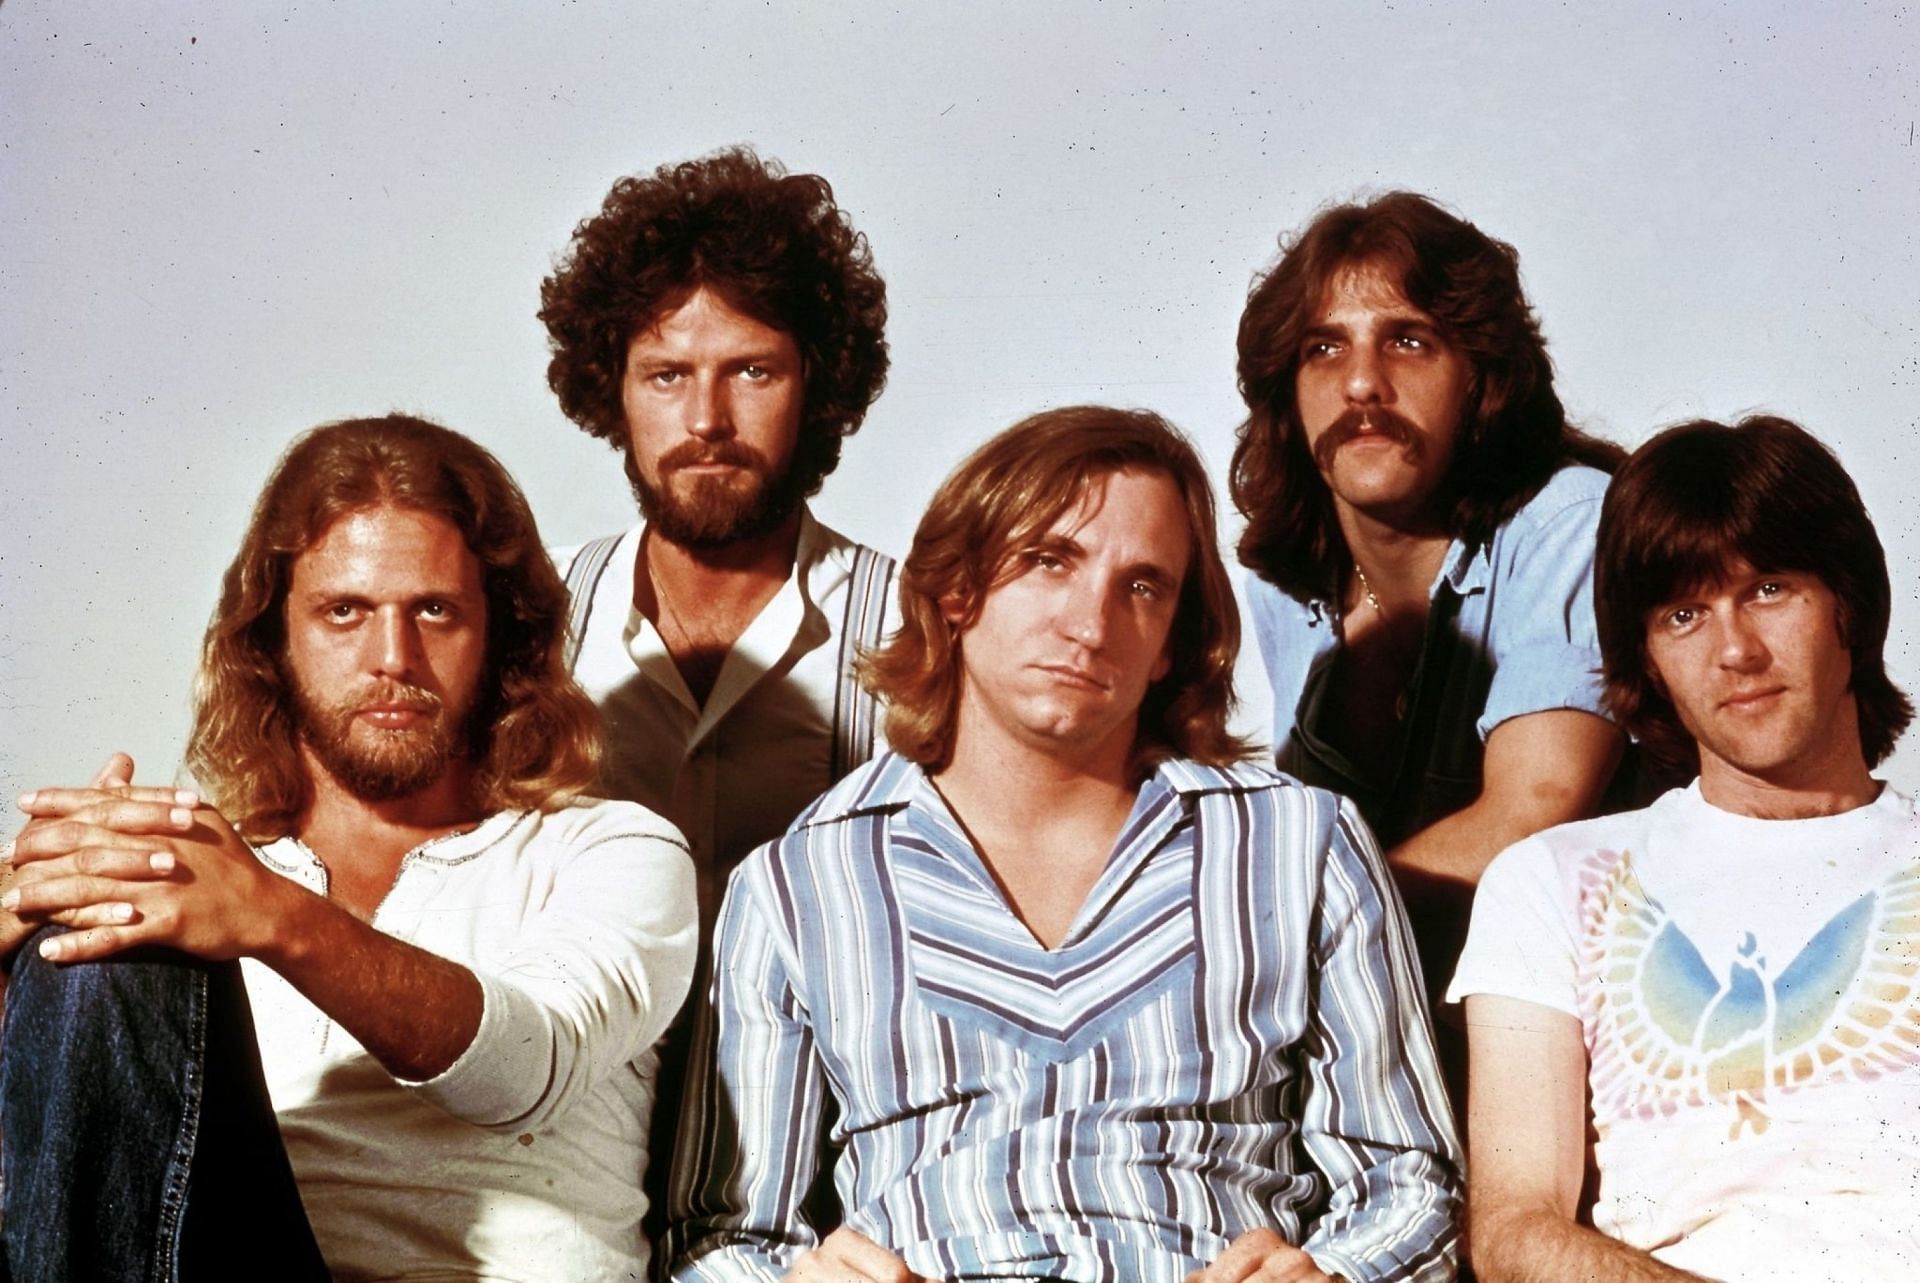 The Eagles pose for a group portrait for their album Hotel California on January 1, 1976 (Image via Getty Images)